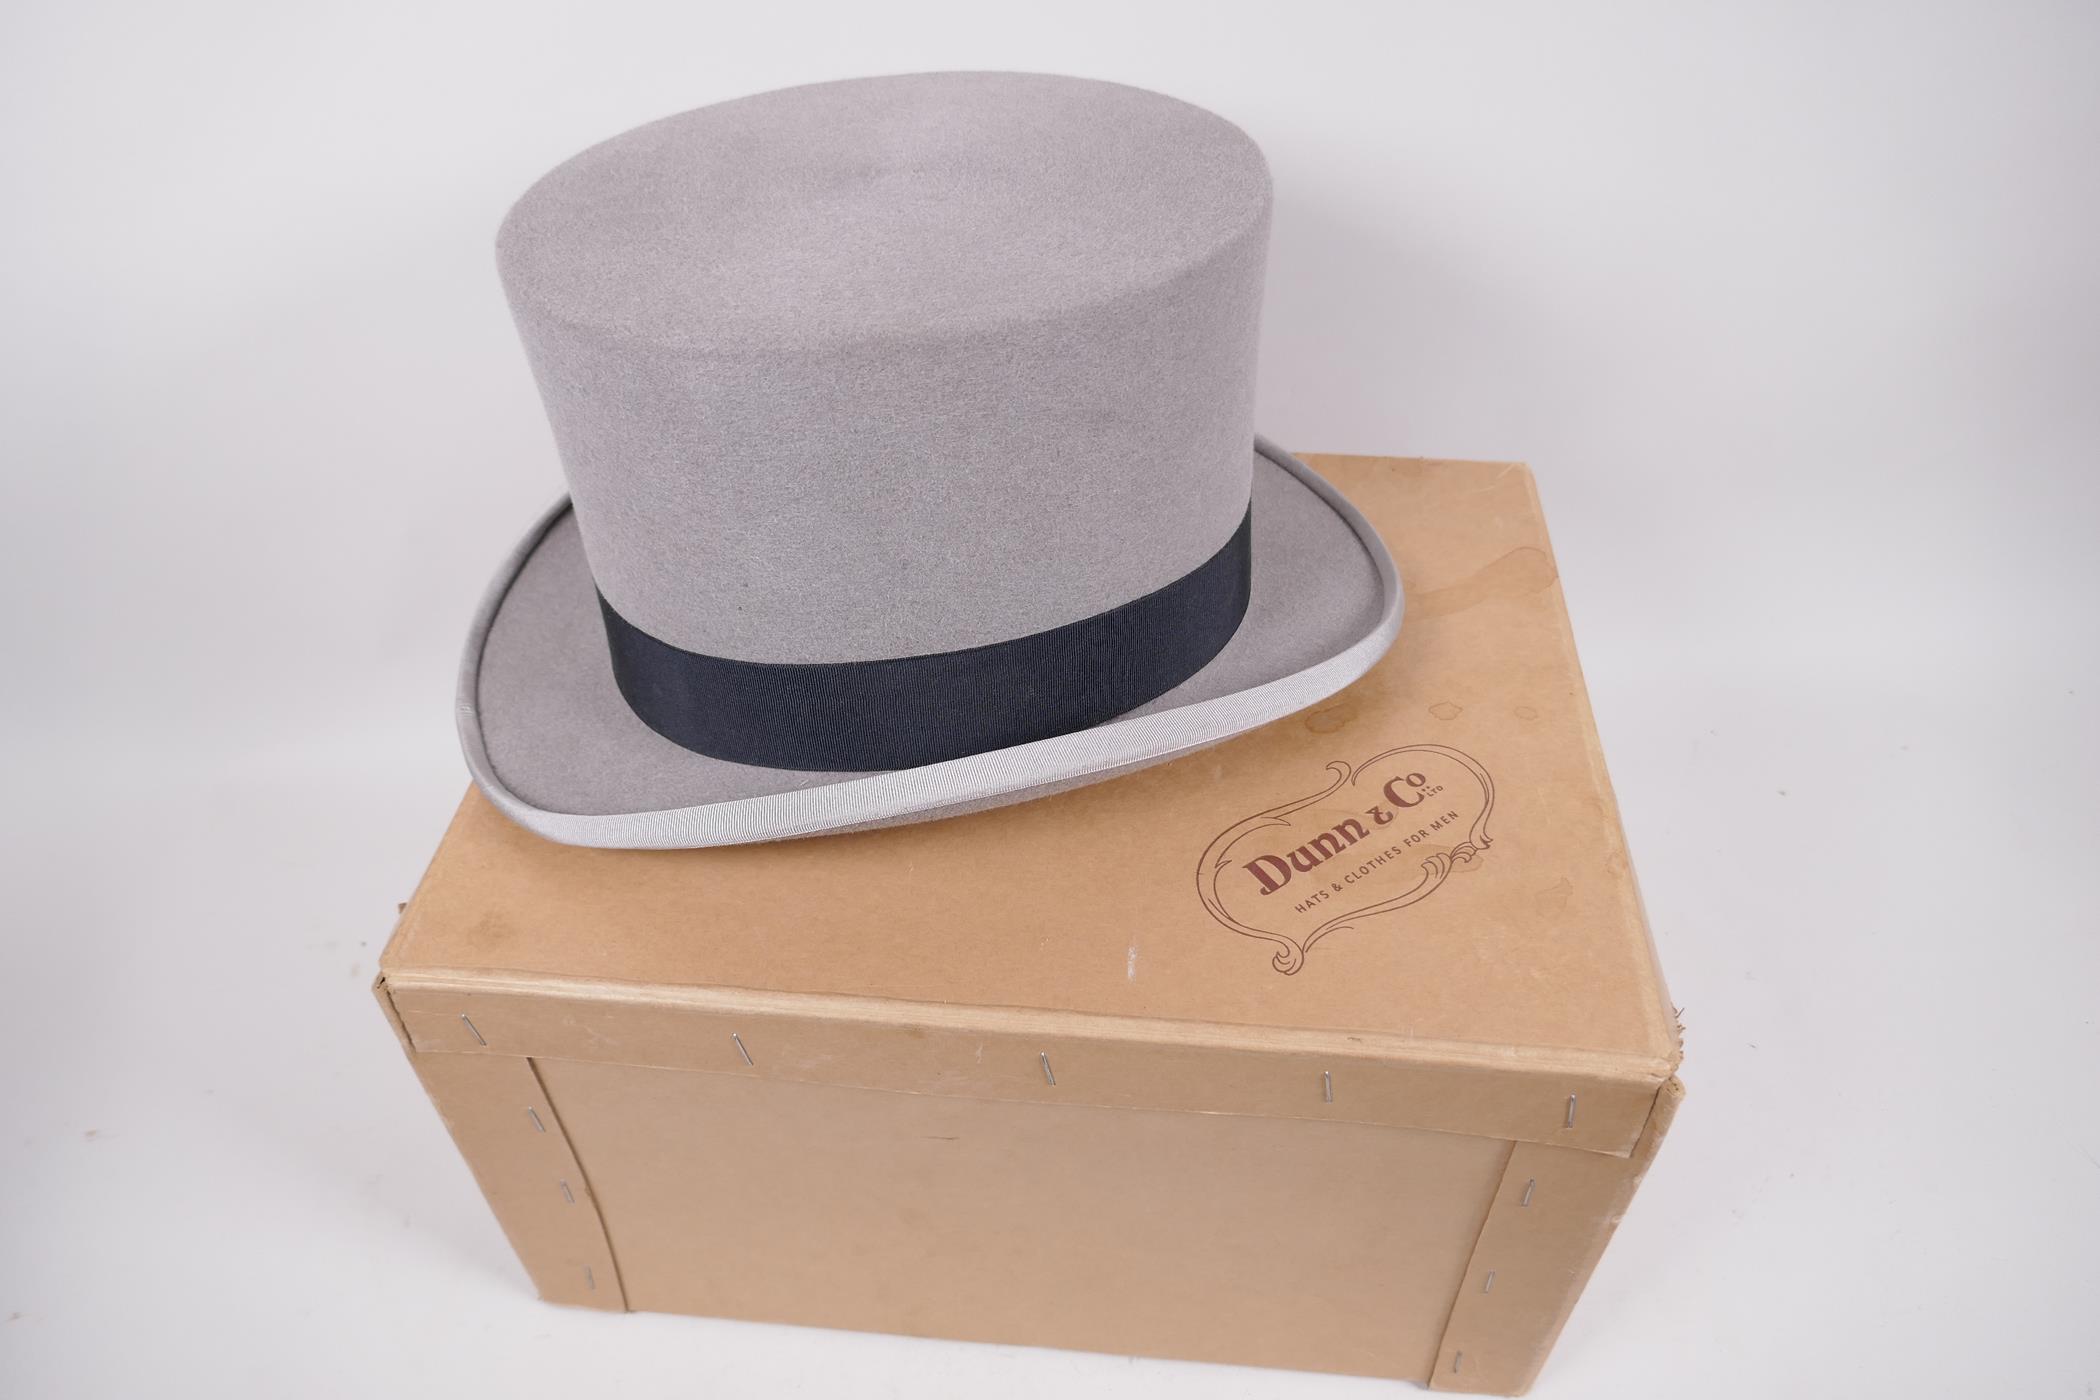 A Dunn & Co. grey top hat, size 7?, in original box